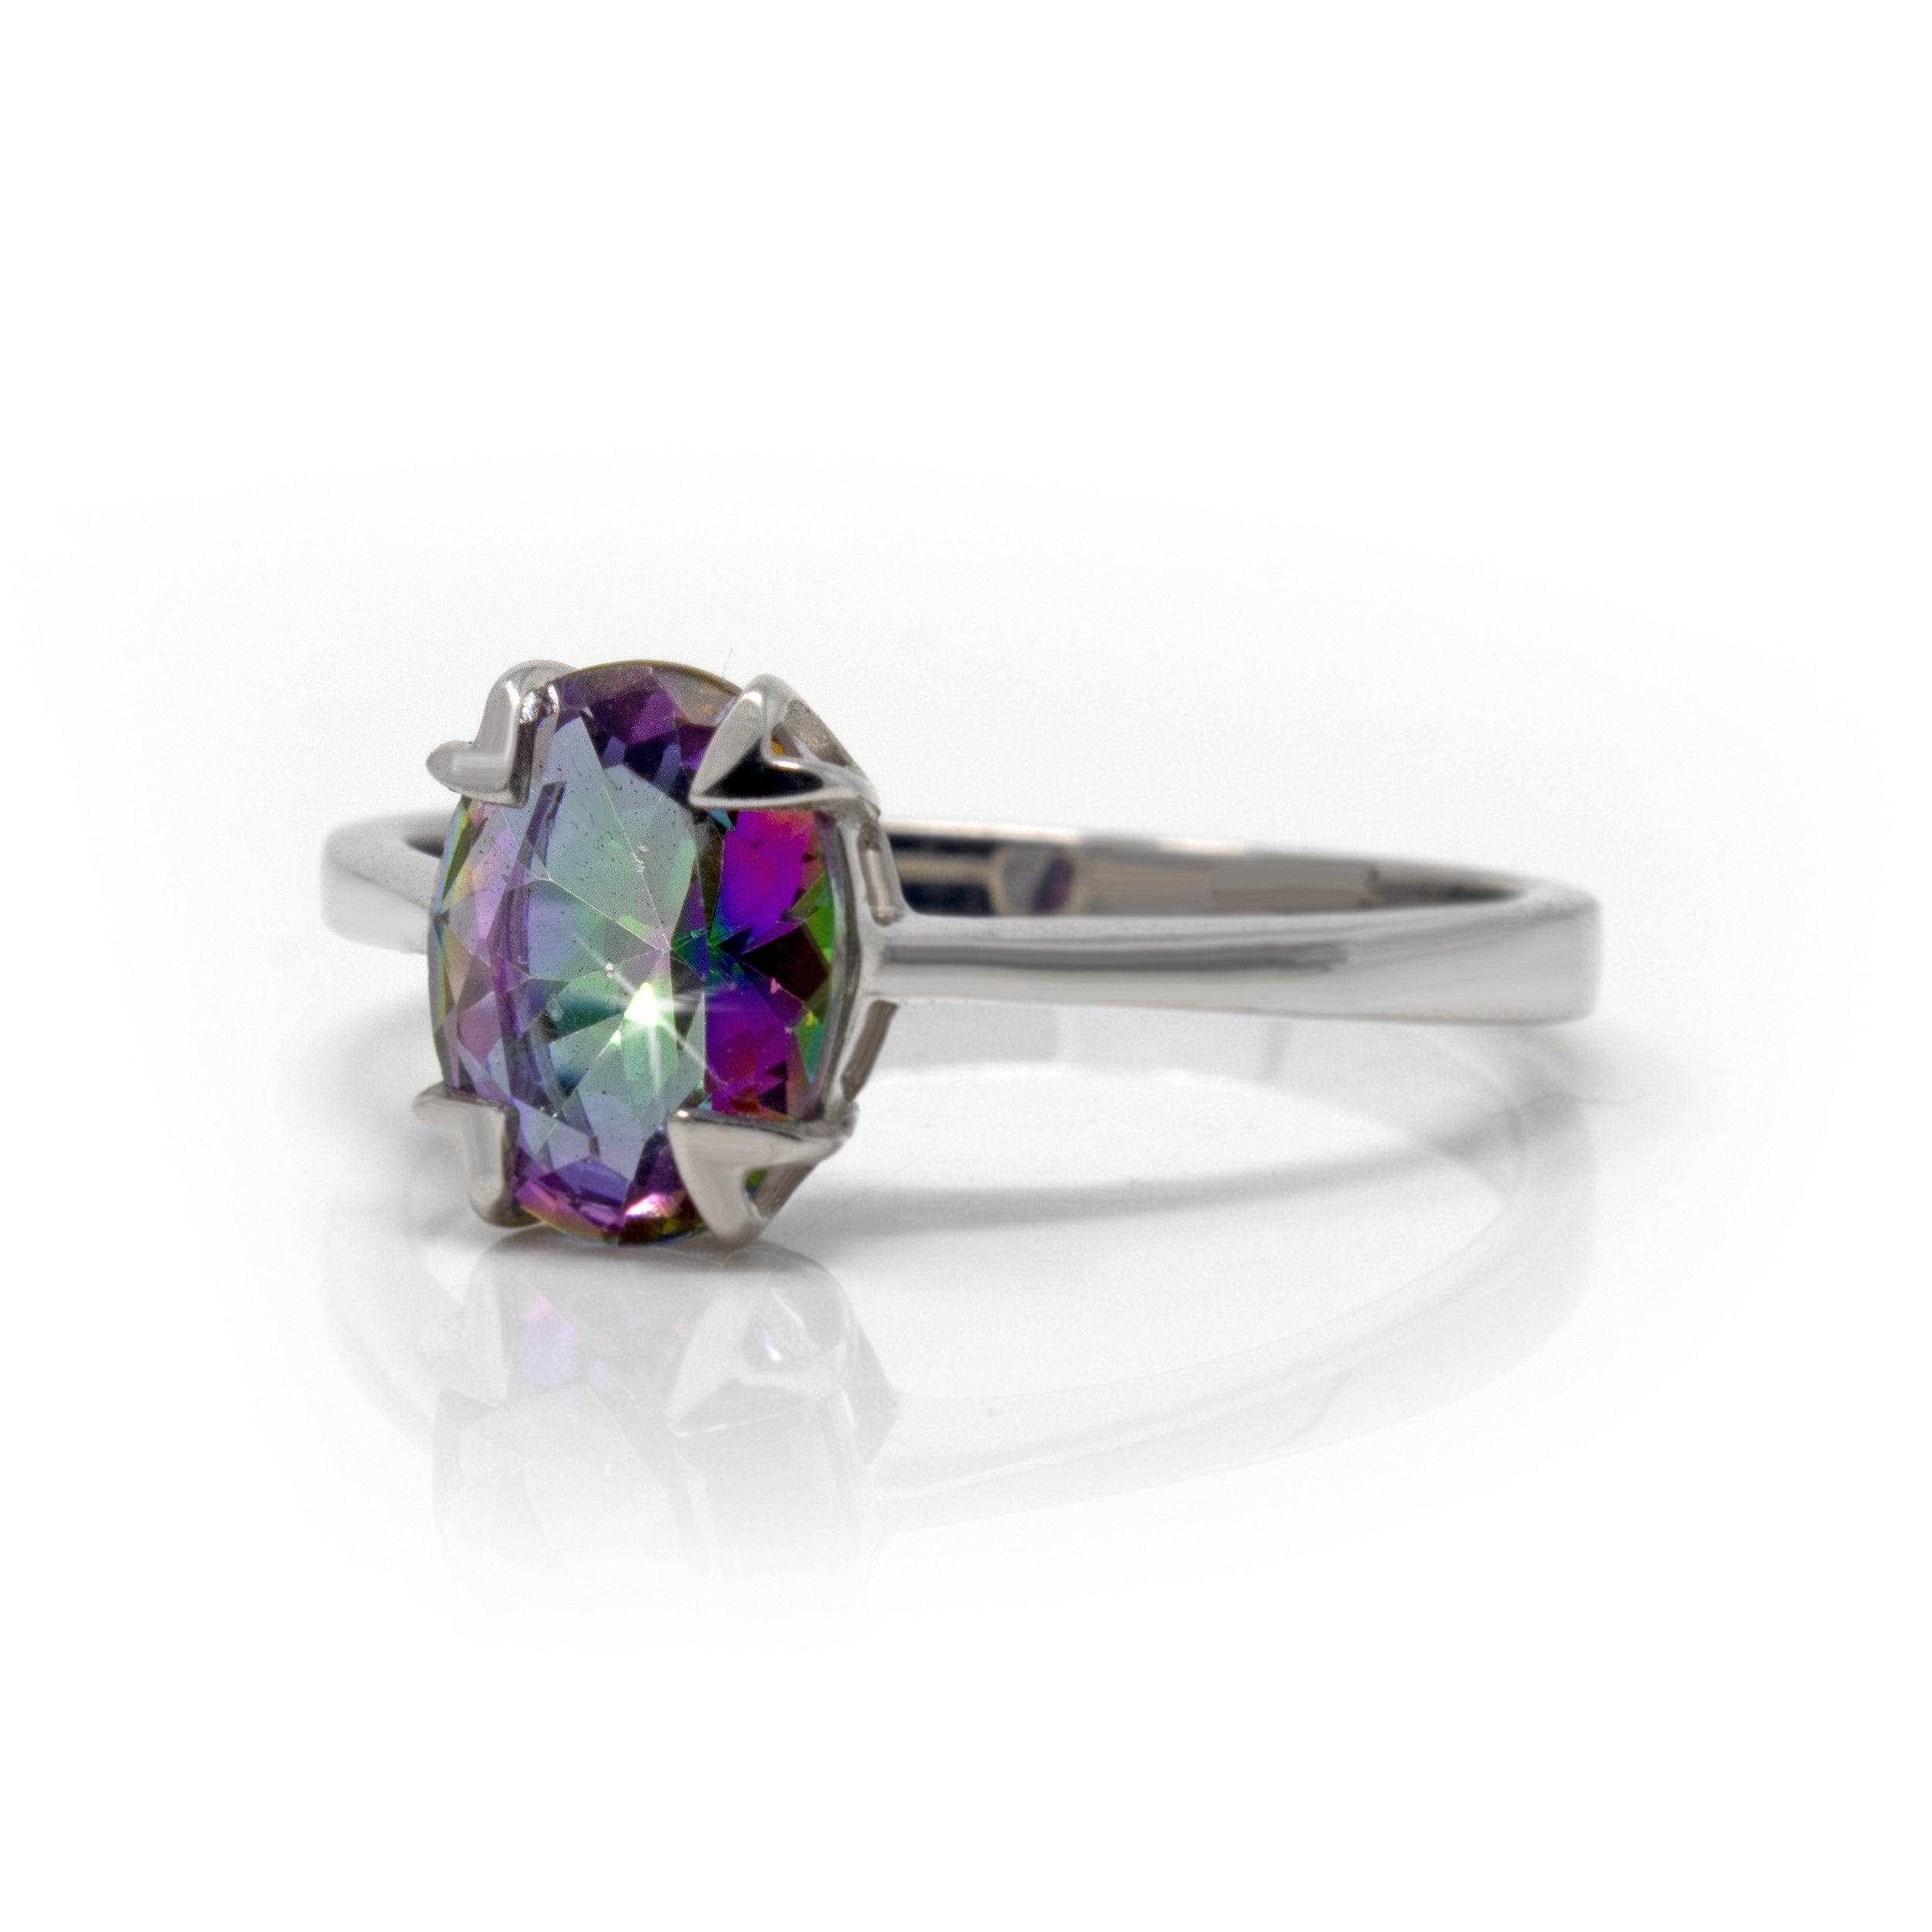 Mystic Topaz Ring Size 6 - Faceted Prong Set Oval With Fancy Open Silver Prongs & Bezel Set On Silver Vert Band